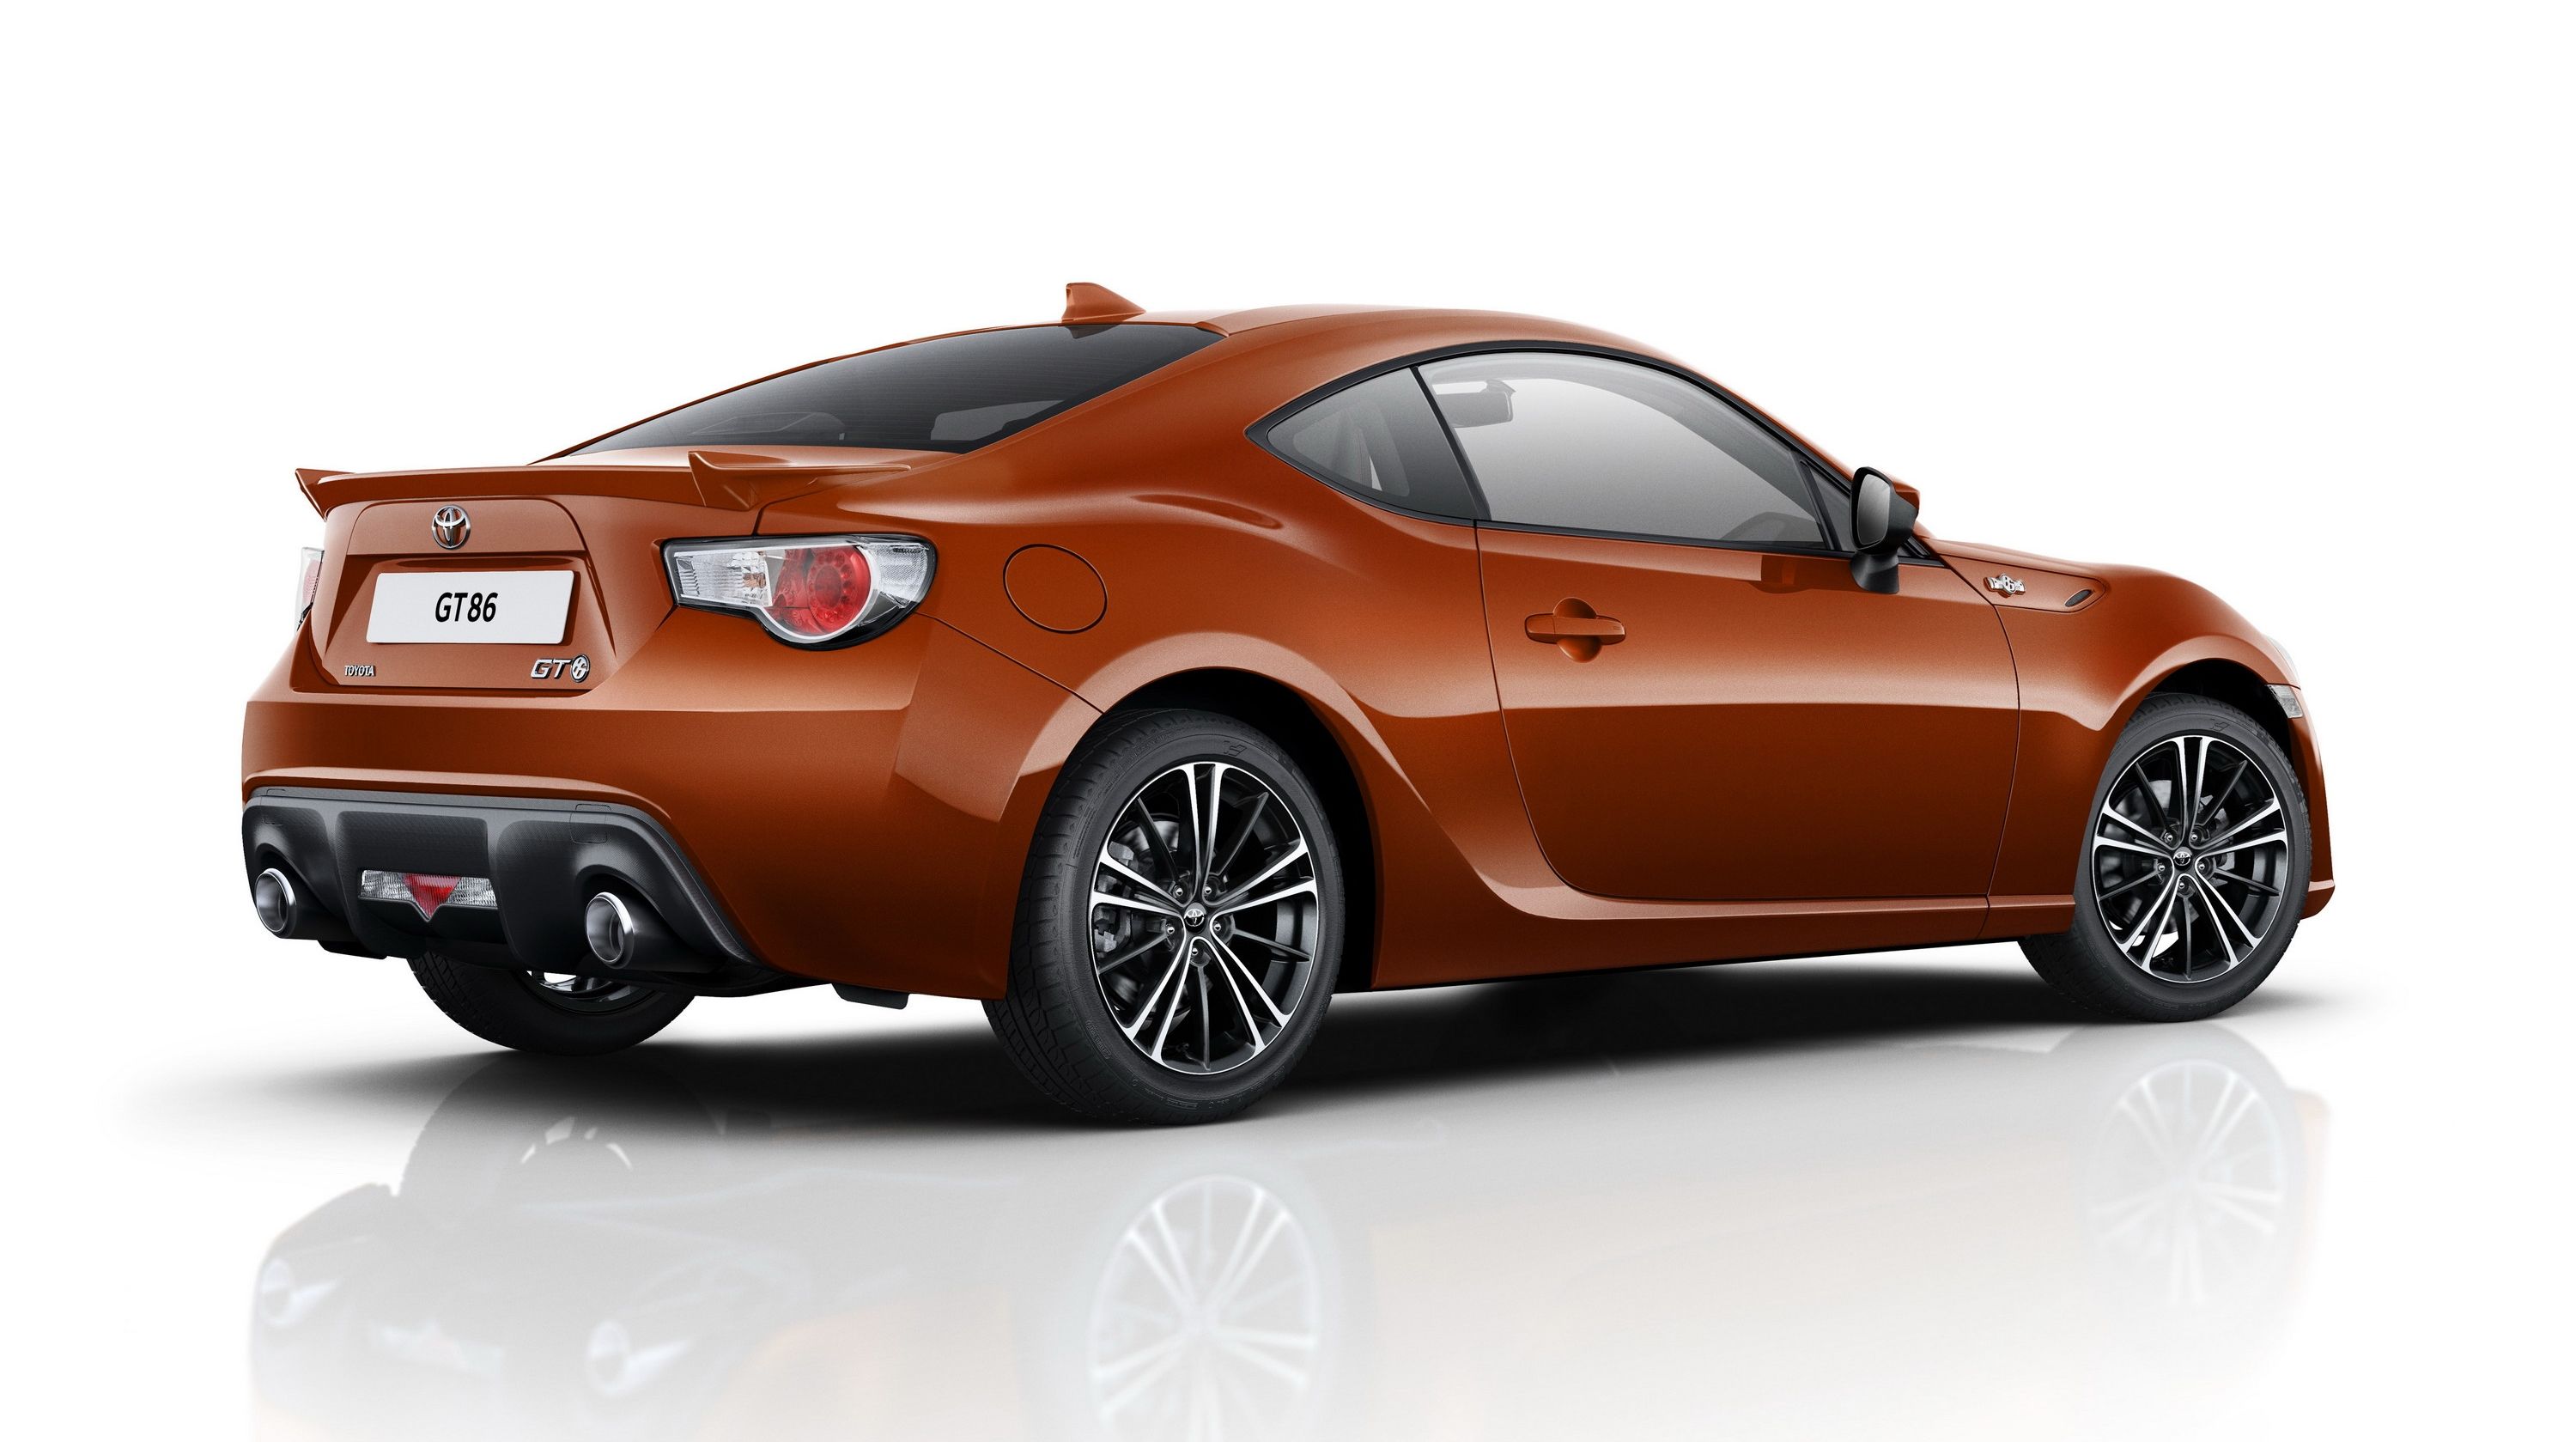  Hey look, a new GT 86... Still the same old 2.0-liter engine though. At least this one's cheaper though. 